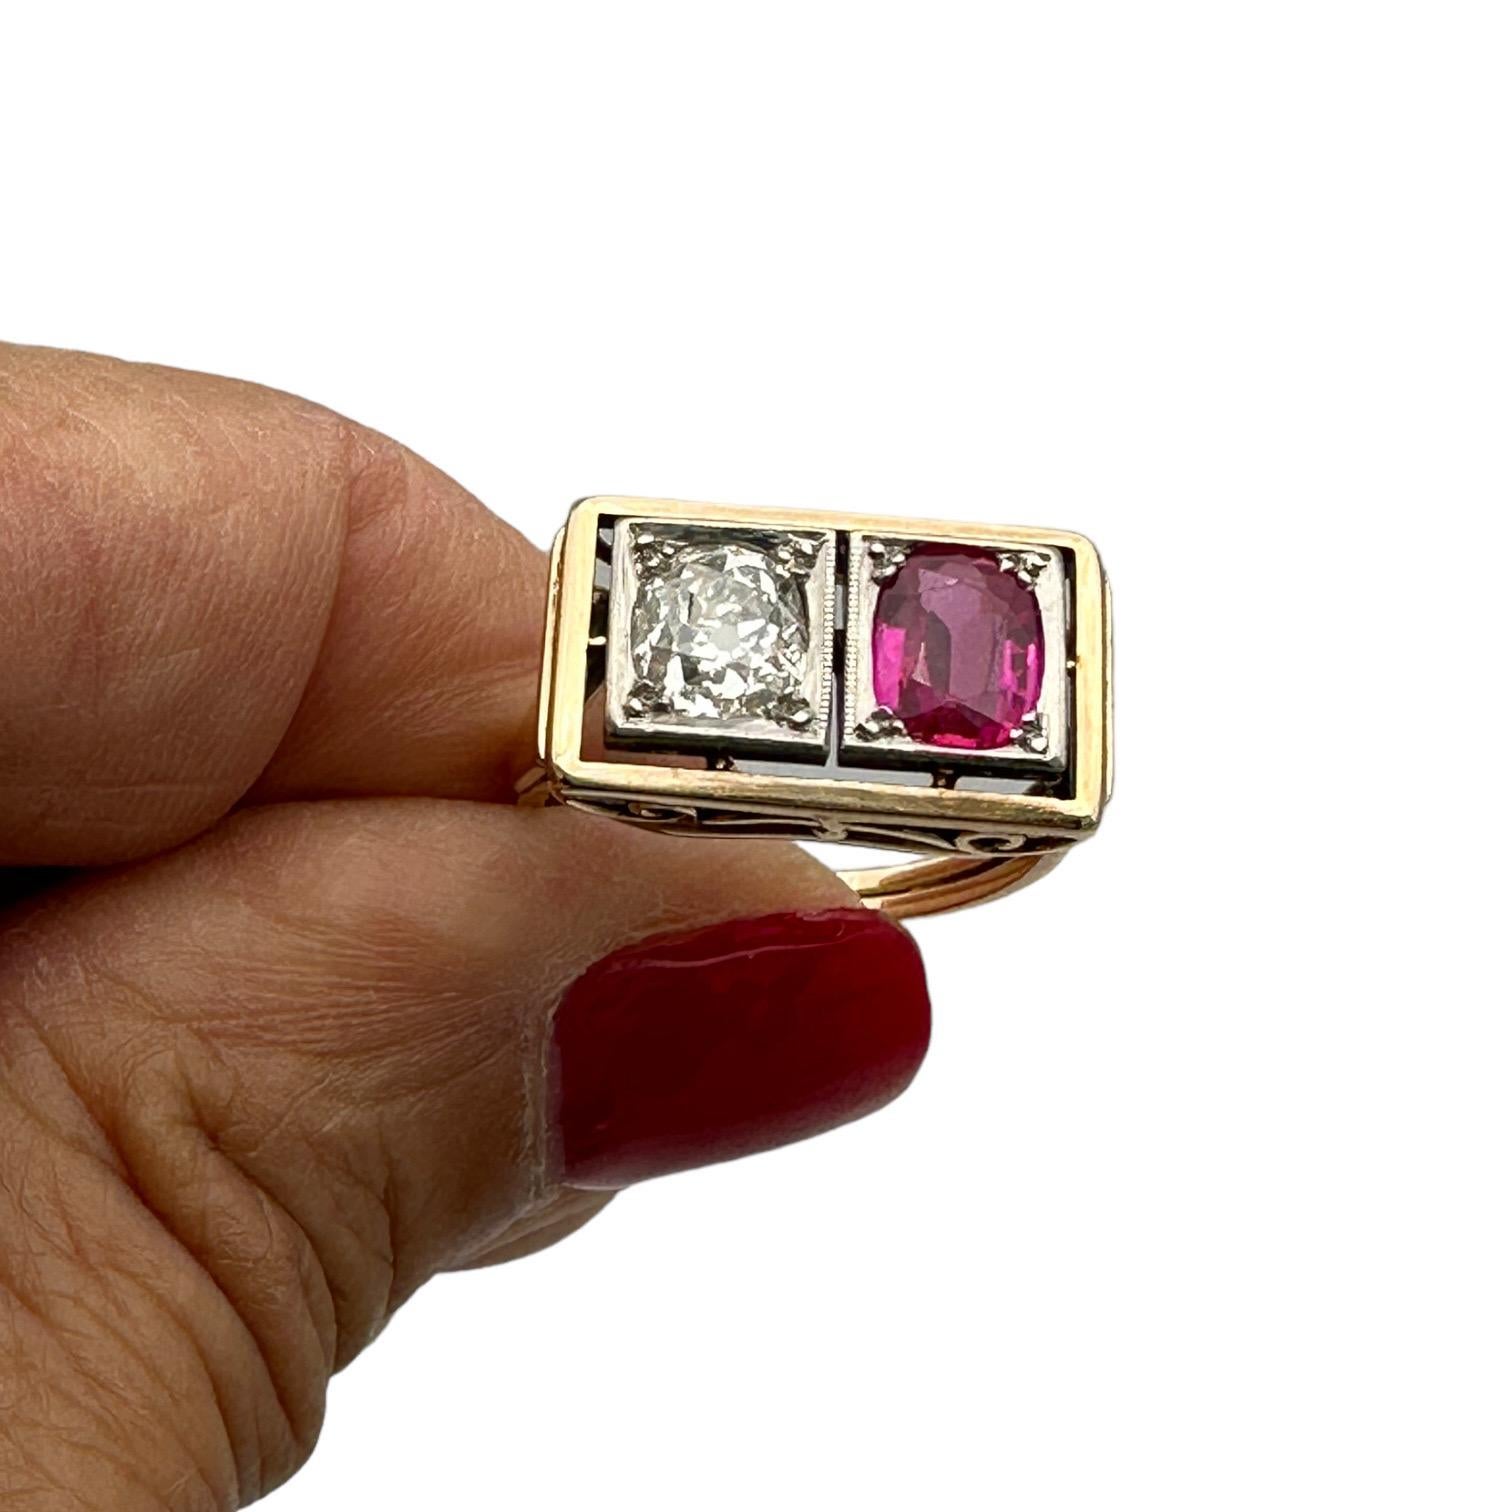 1800's Art Deco Old Miners Cut Diamond & Ruby 2.20 Carat Ring For Sale 1